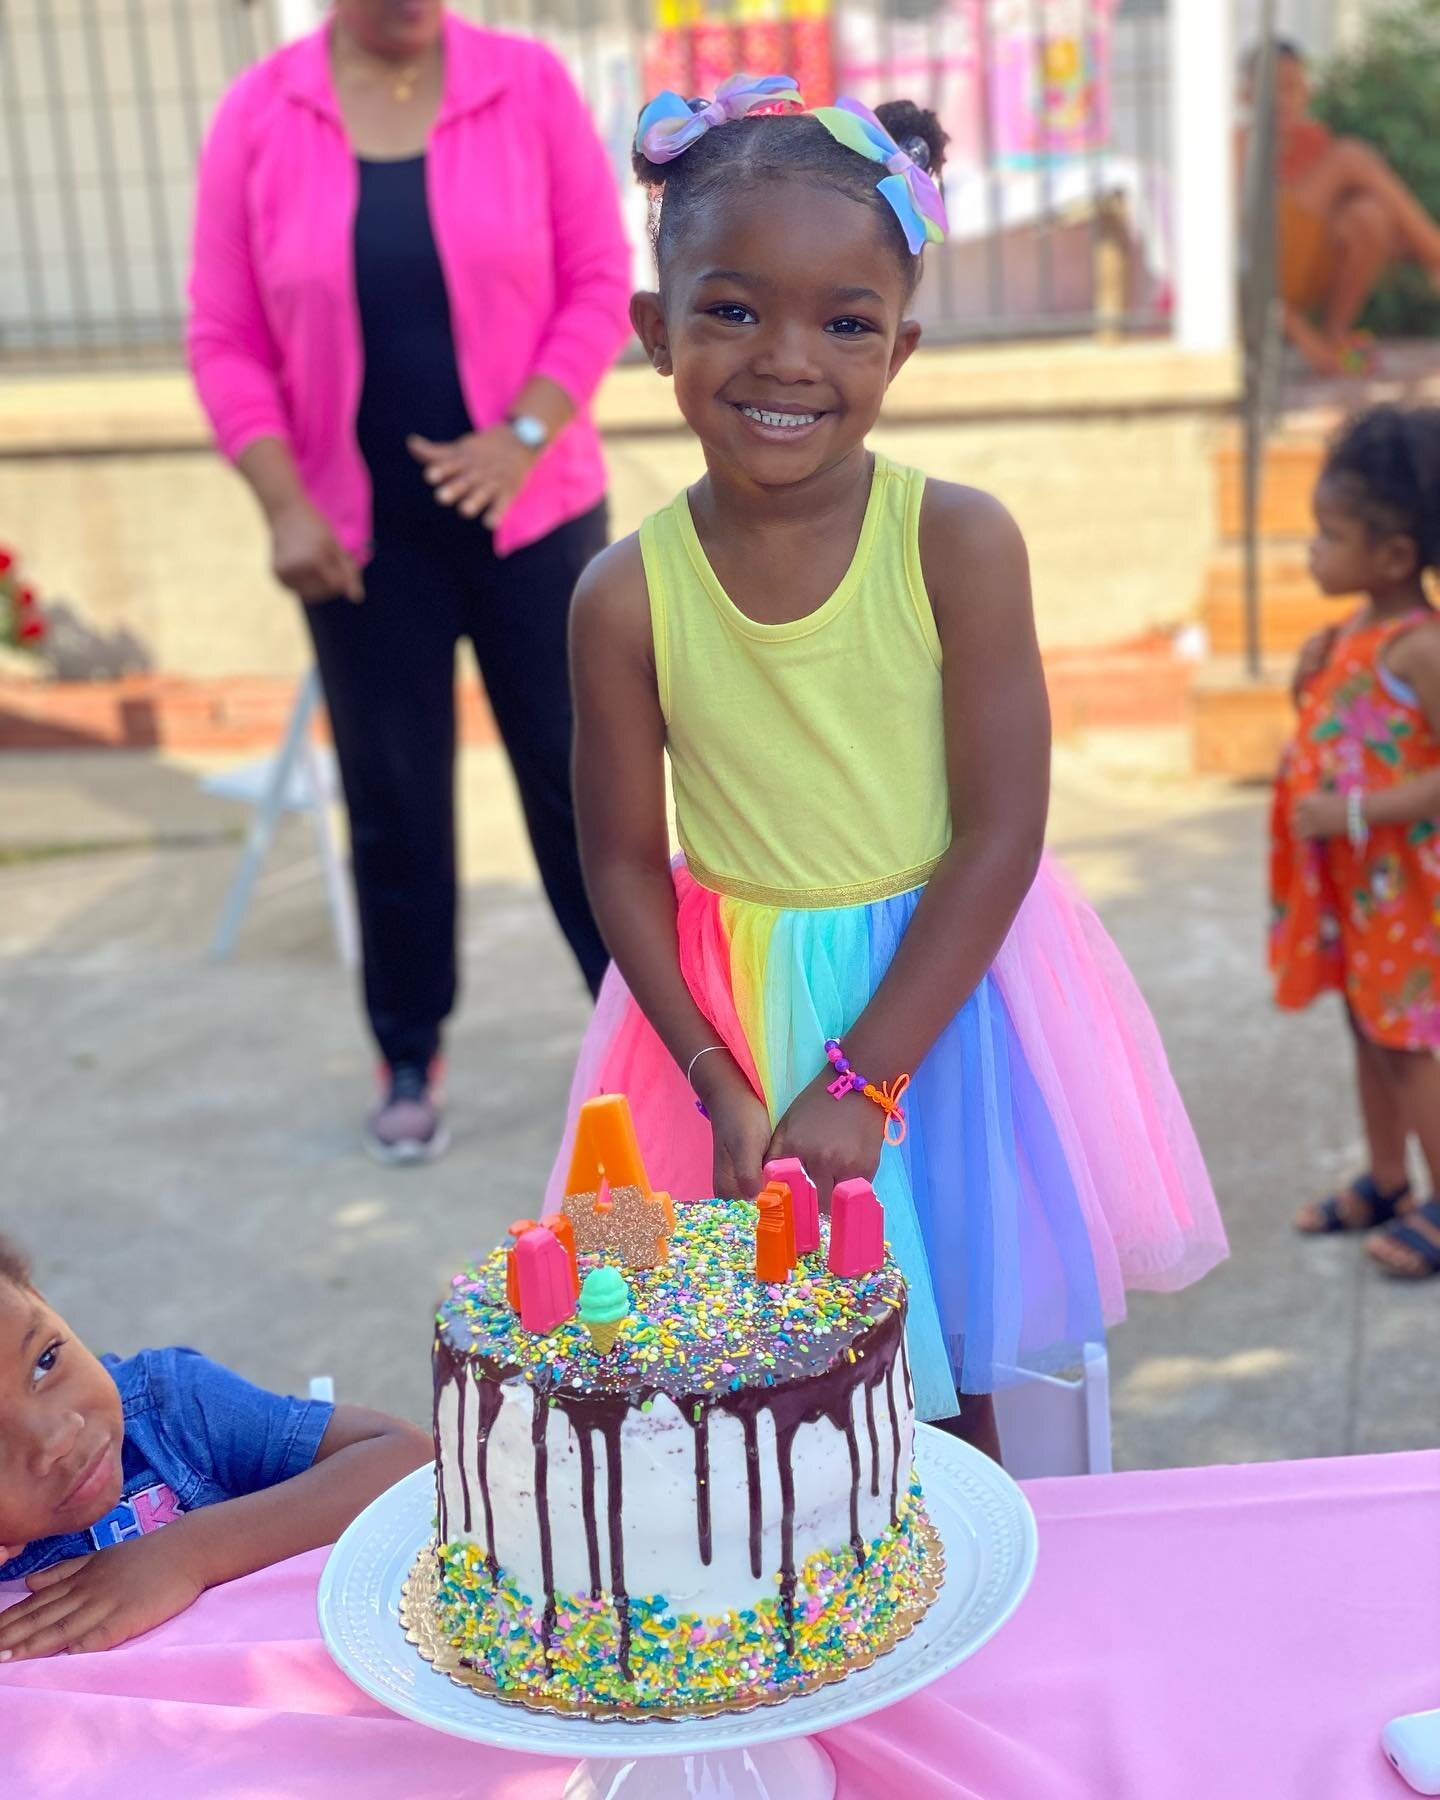 When Jayla blew out her candles I felt that thang in my soul! May all your wishes come true 🙏🏾 Just remain in God baby girl! 

 &ldquo;If you remain in me and my words remain in you, ask whatever you wish, and it will be done for you&rdquo; John 15